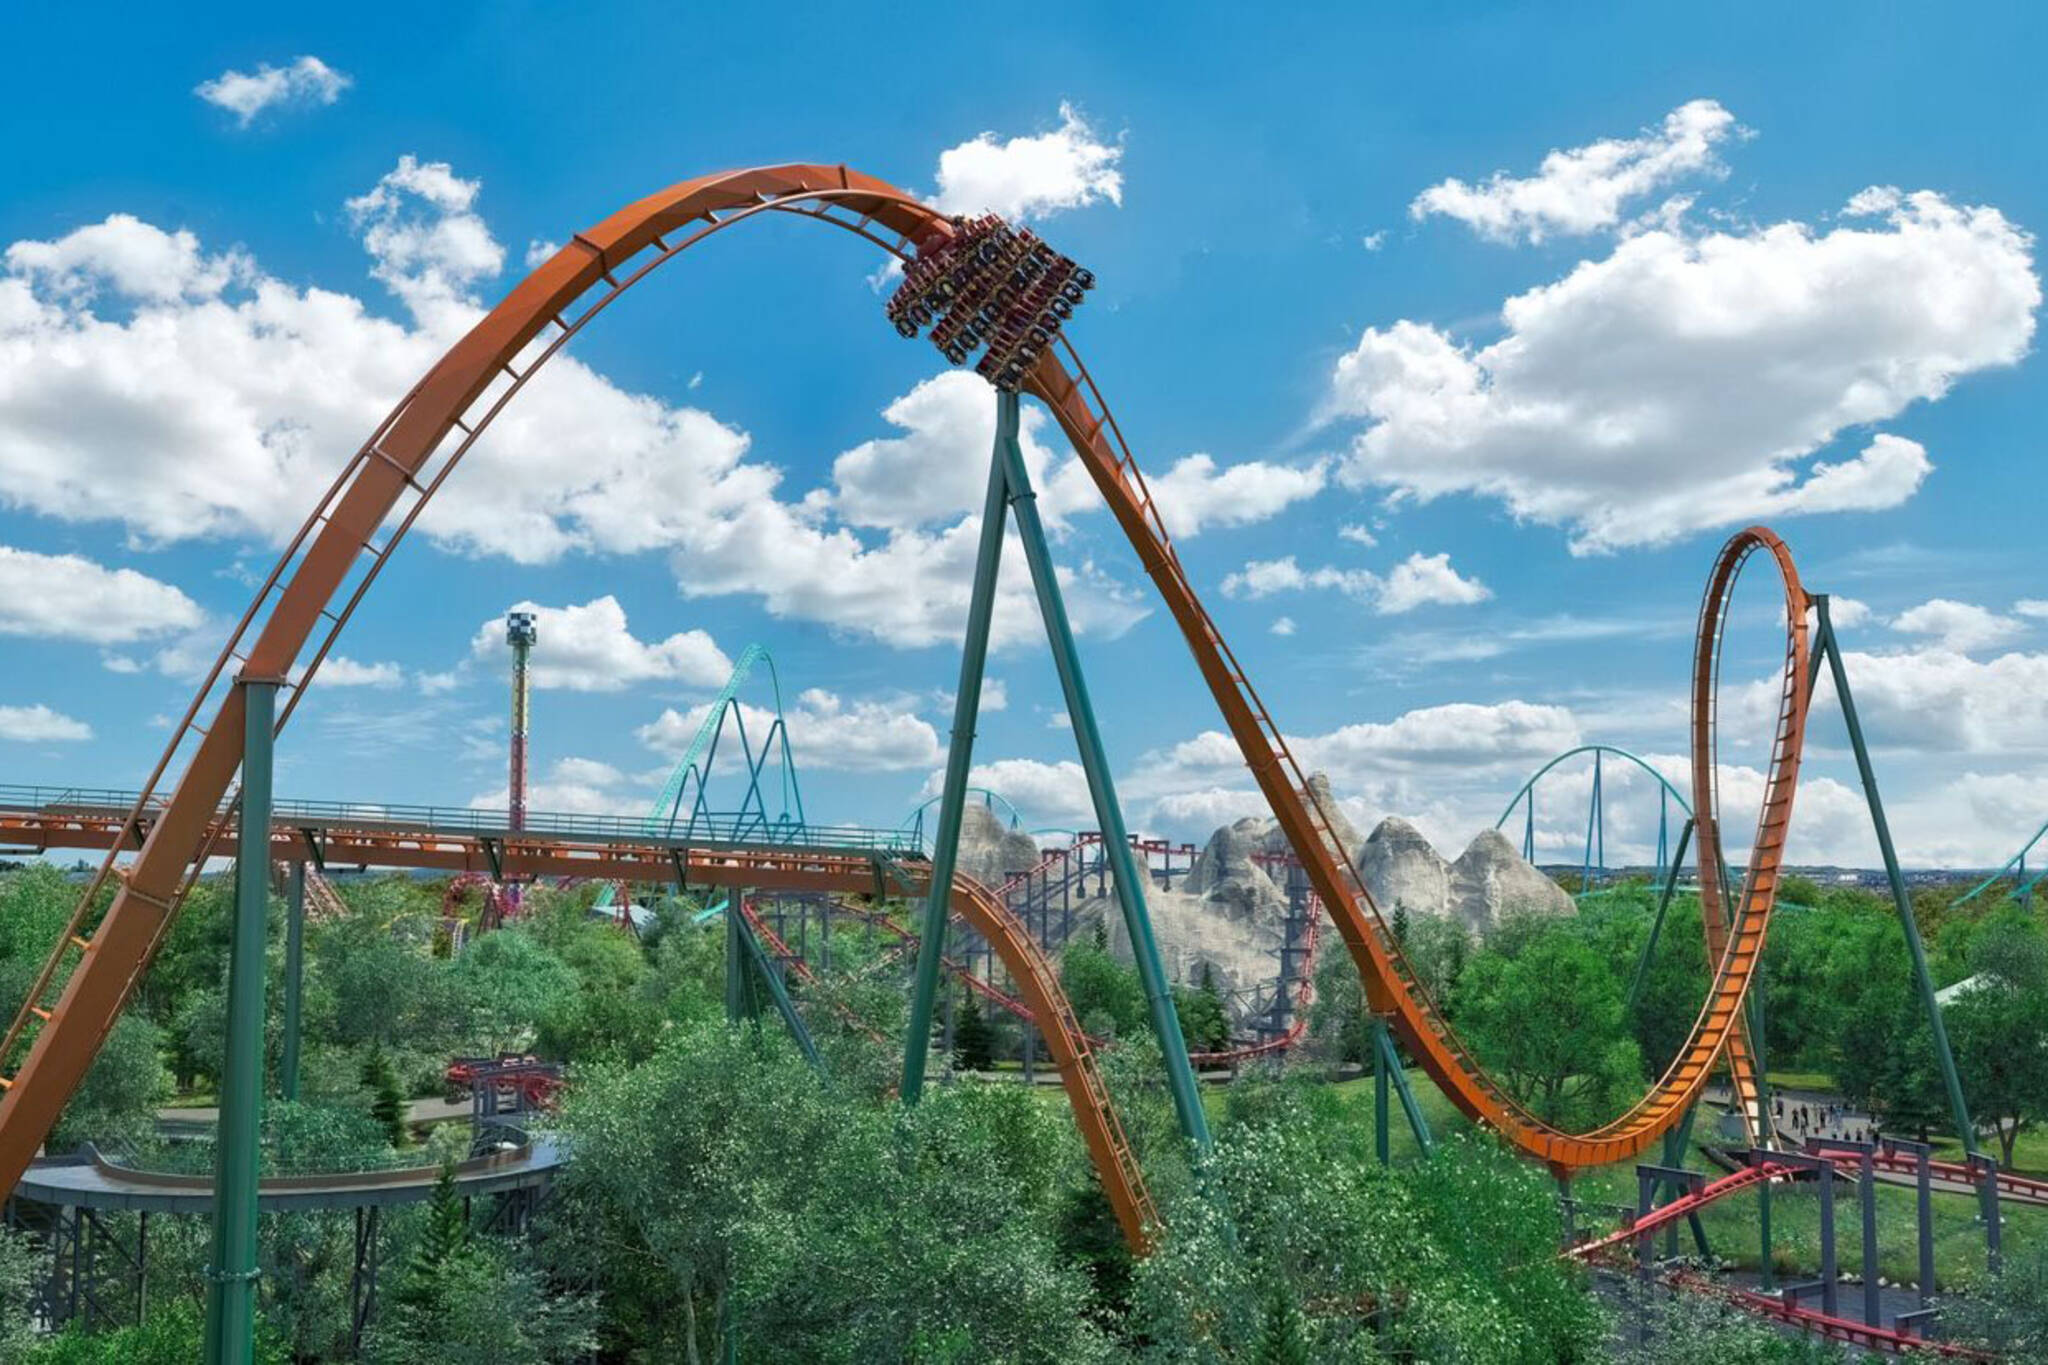 Canada's Wonderland just built the tallest dive roller coaster in the world